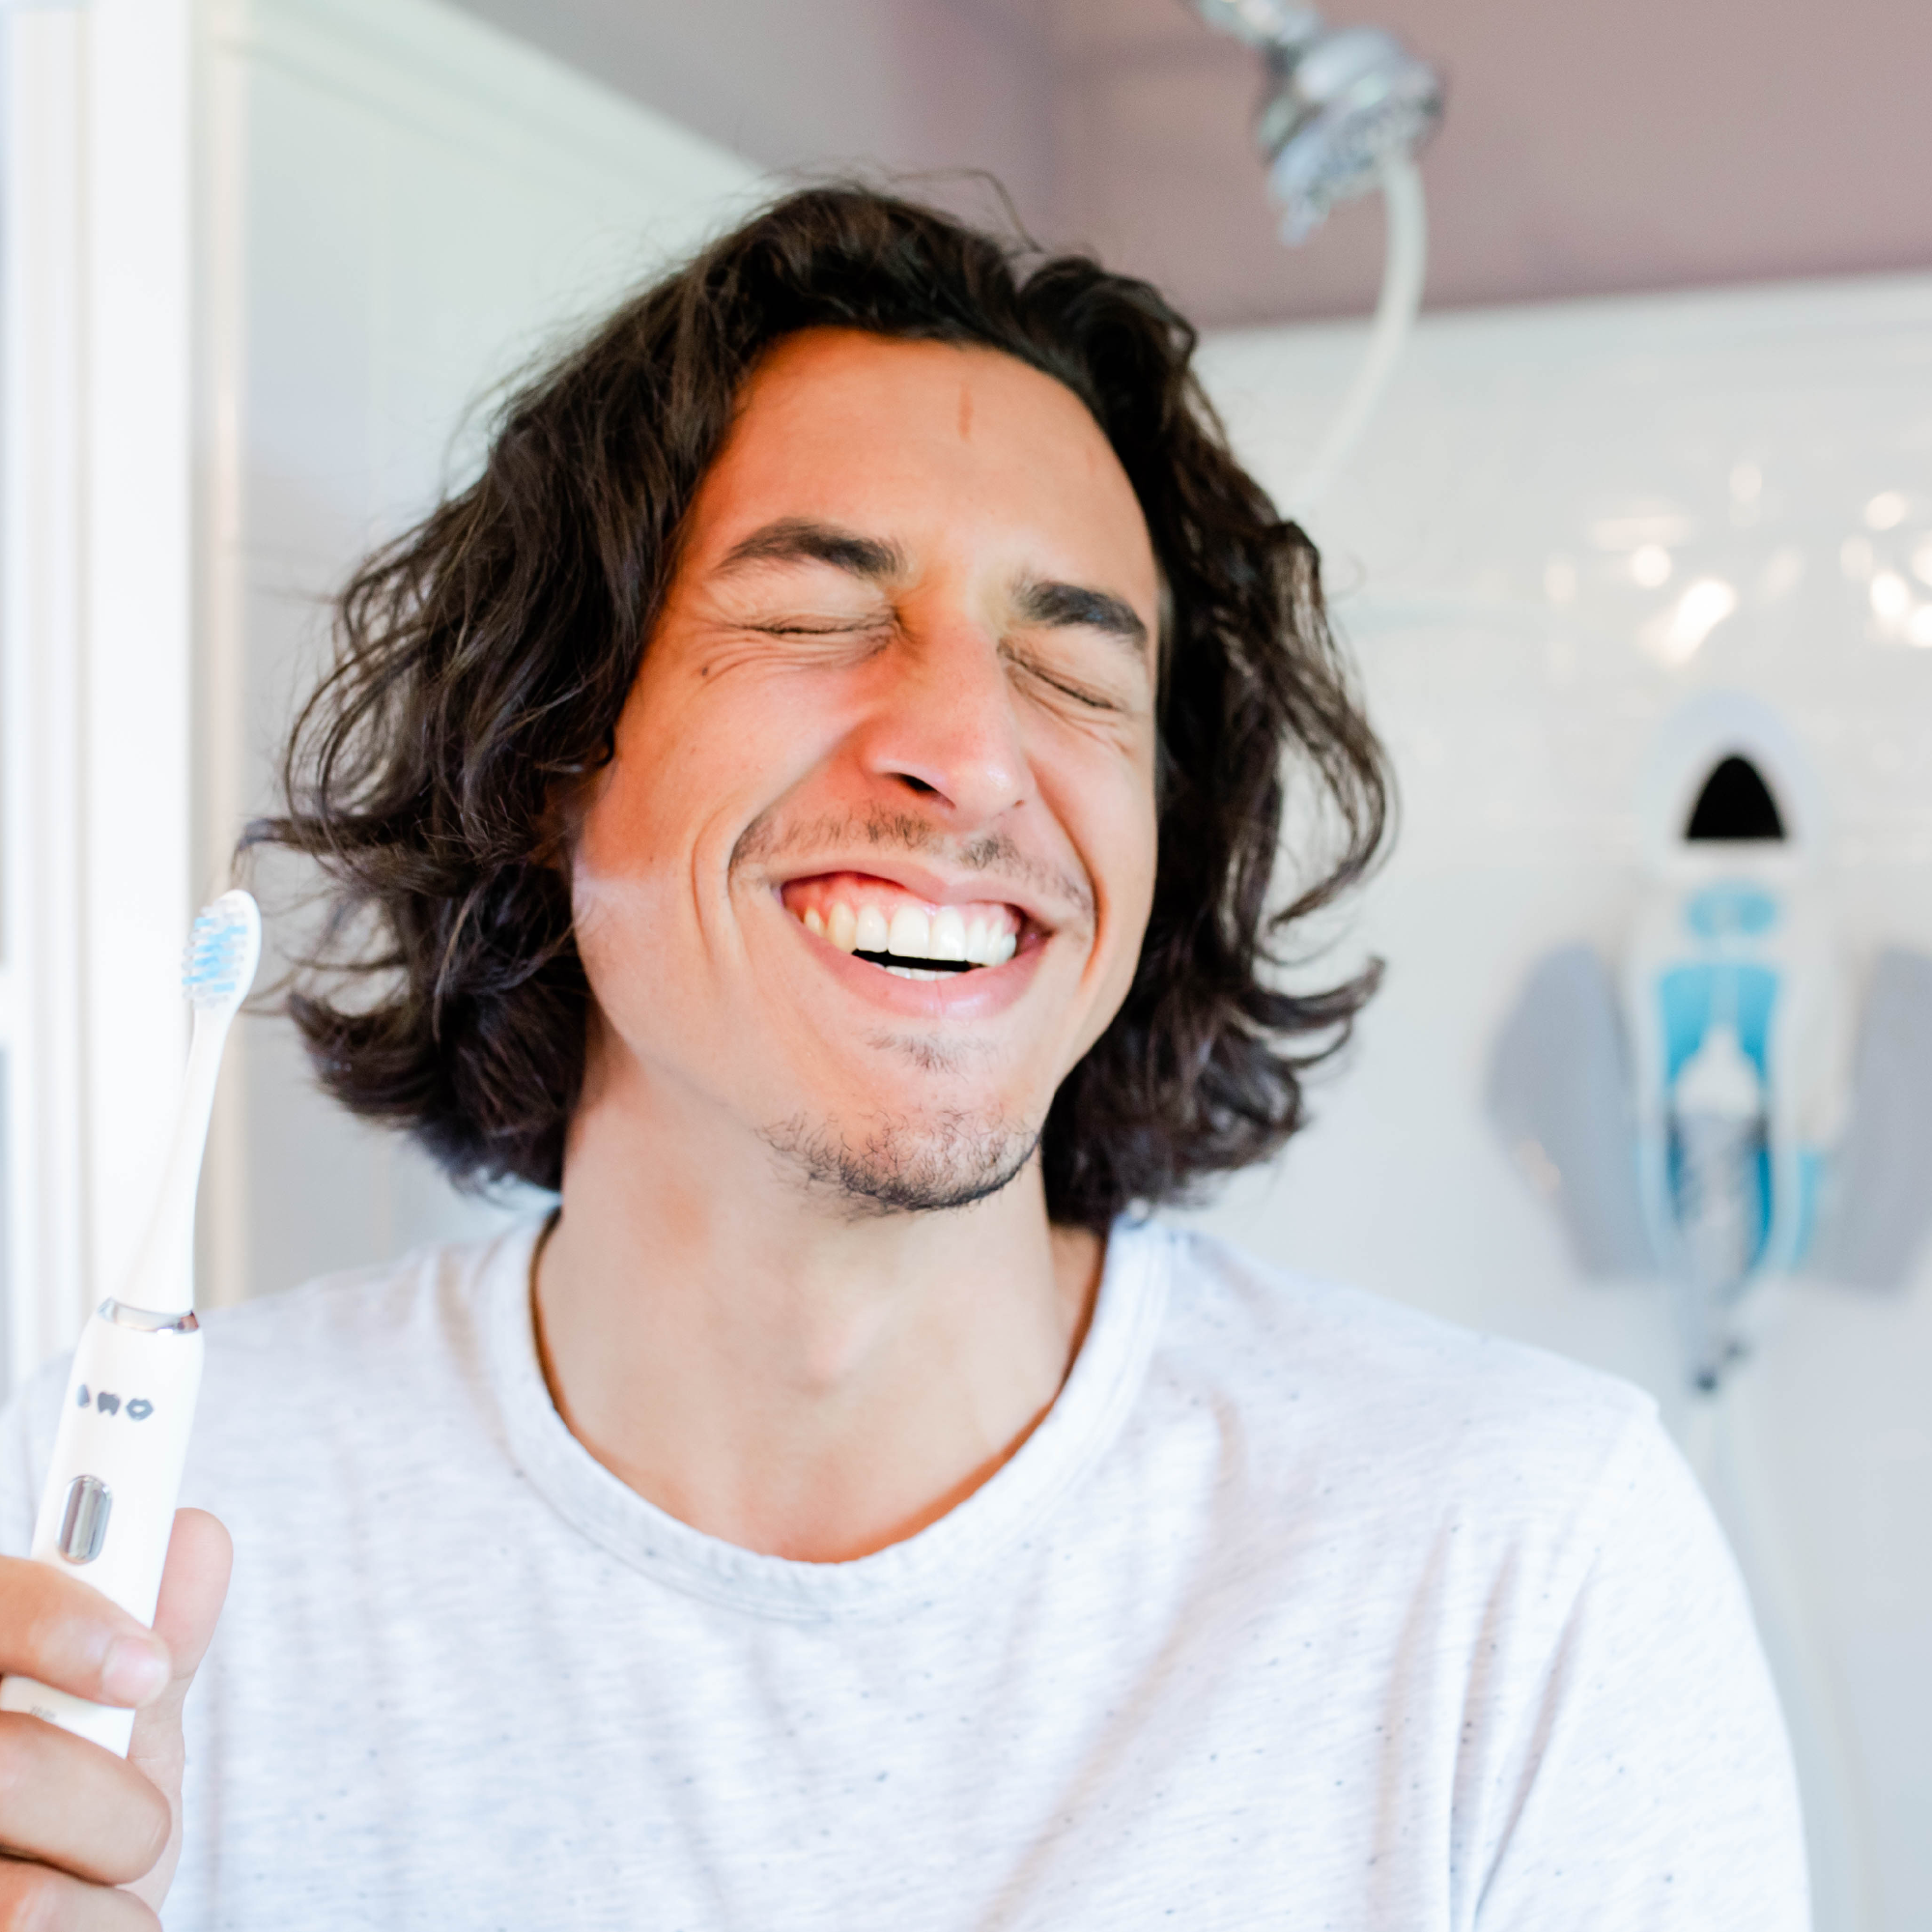 man happy his teeth are so clean with using a sonic toothbrush 